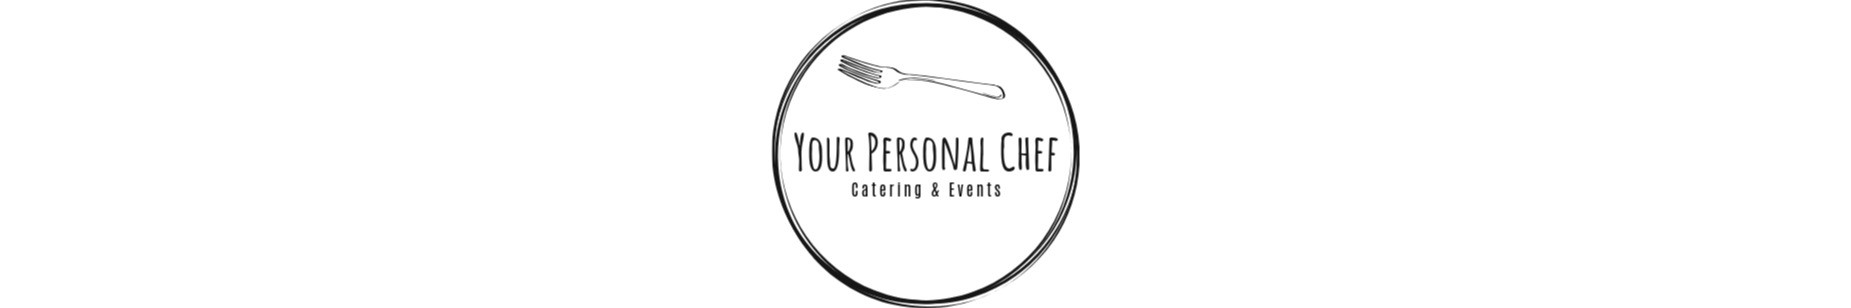 Catering and Events, Private chef, Wedding catering